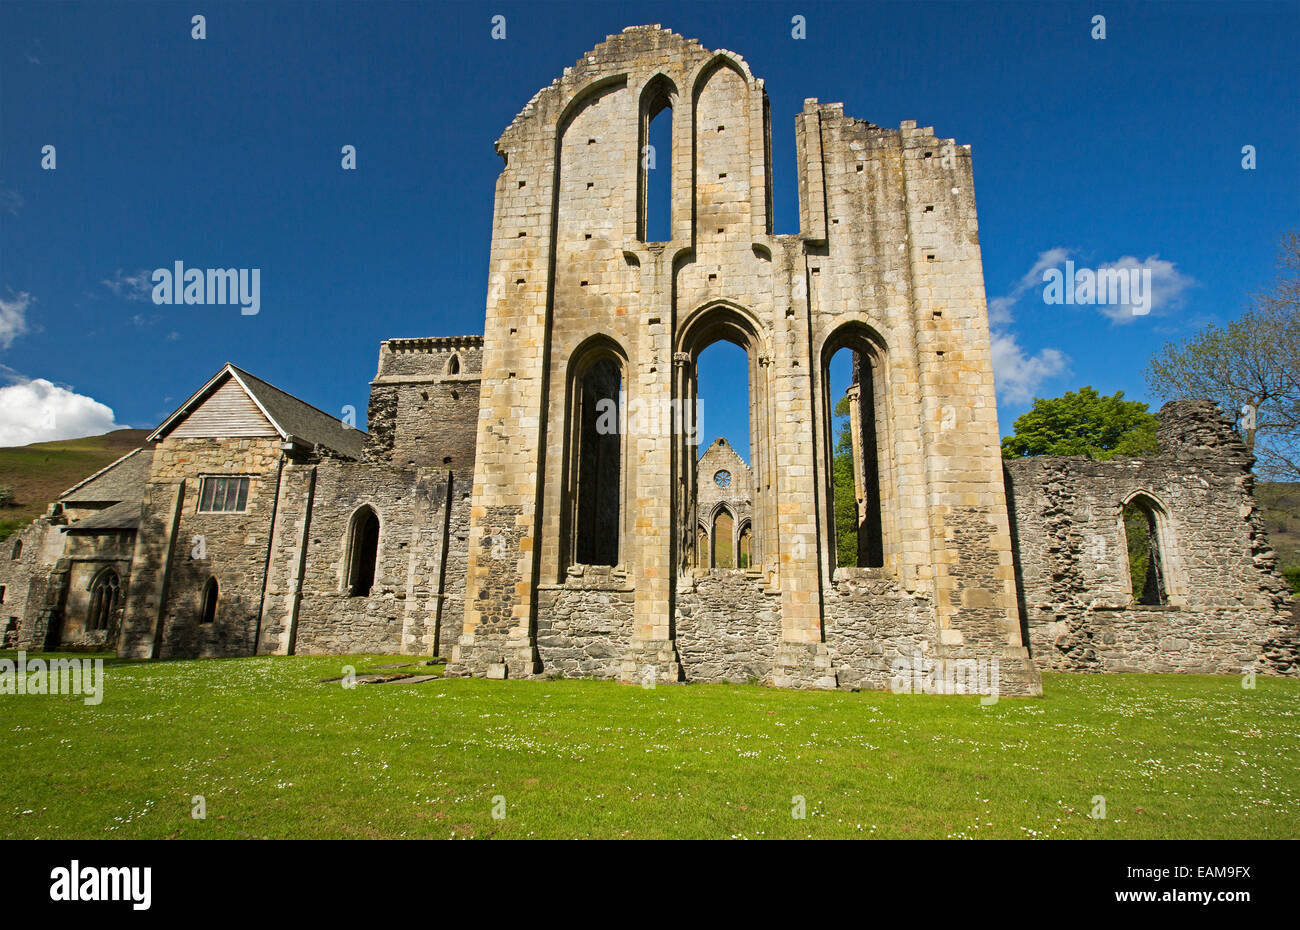 Ornate facade of 13th century Valle Crusis abbey ruins rising from emerald grass to blue sky  near Llantysilio in Wales Stock Photo